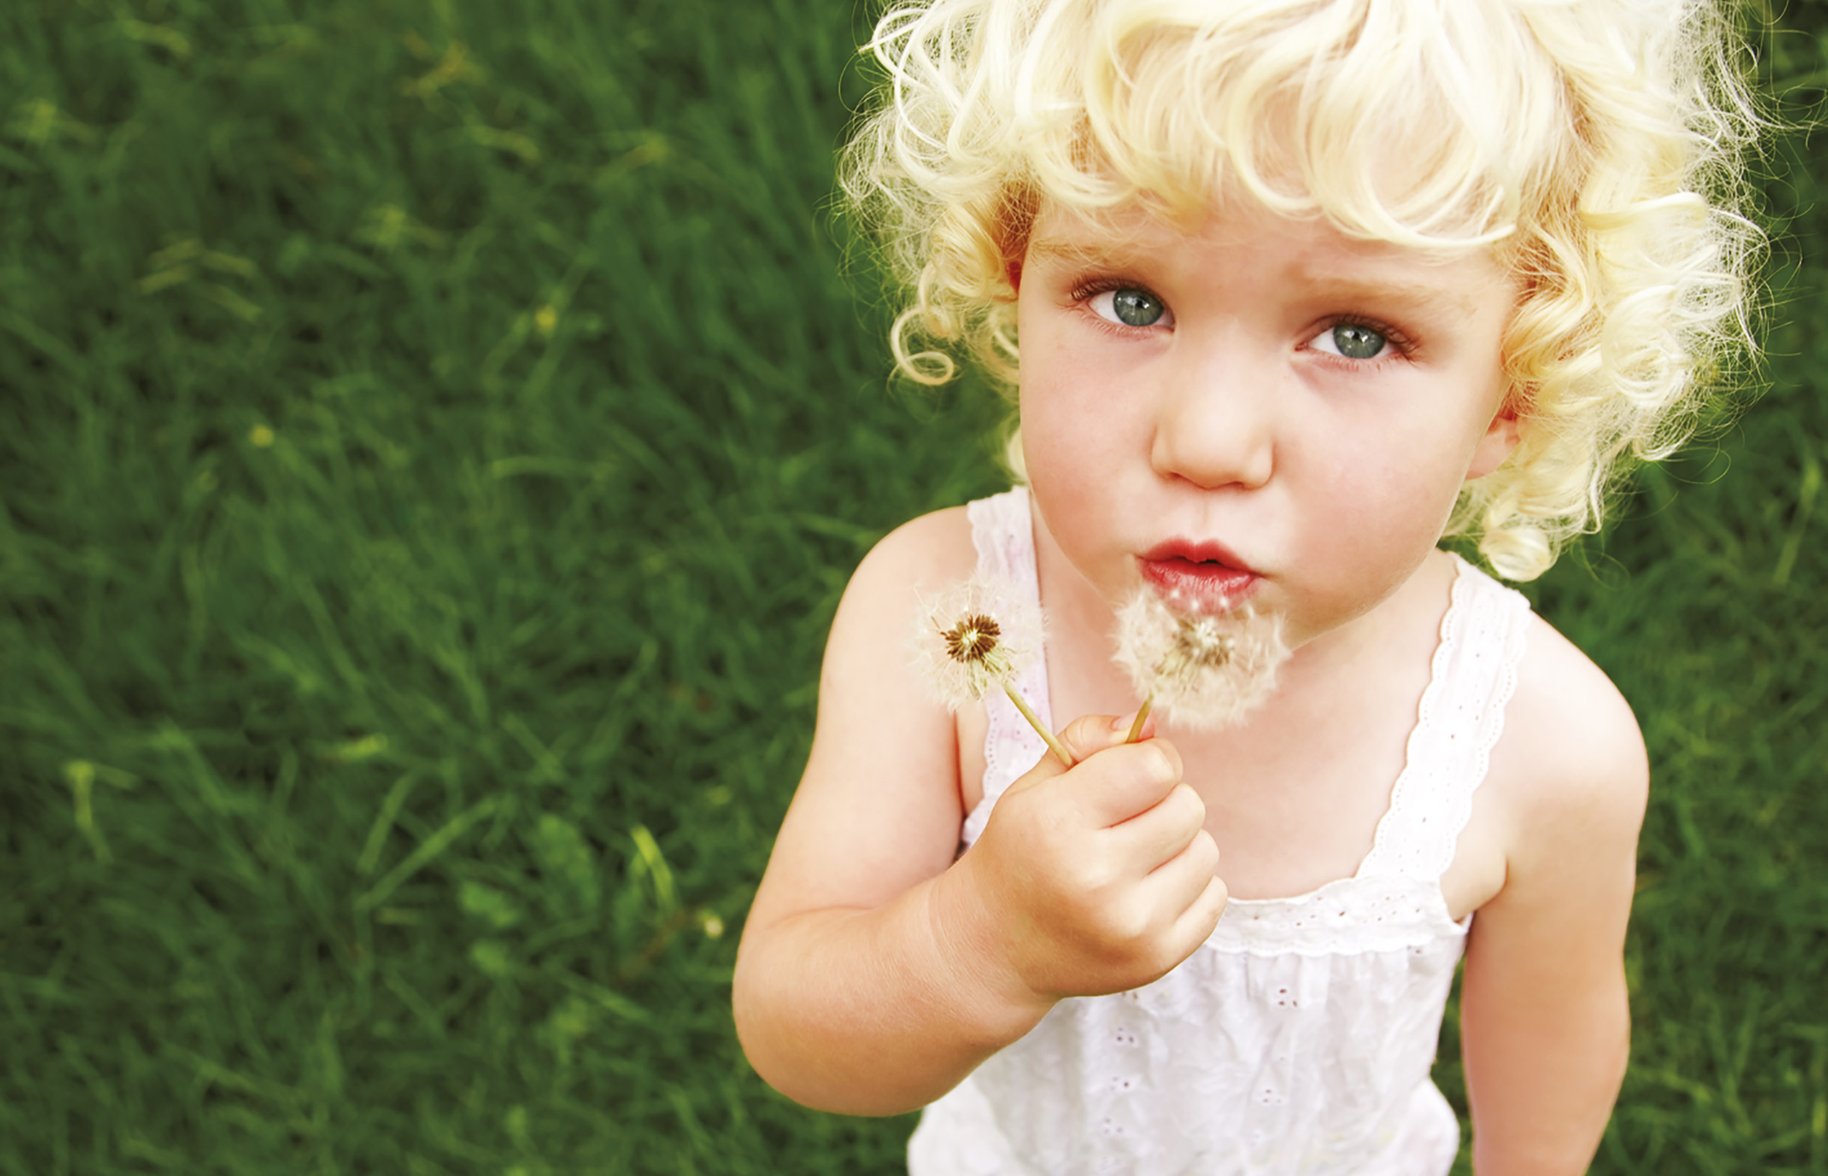 Only Organic portrait photography child cute blowing dandelion